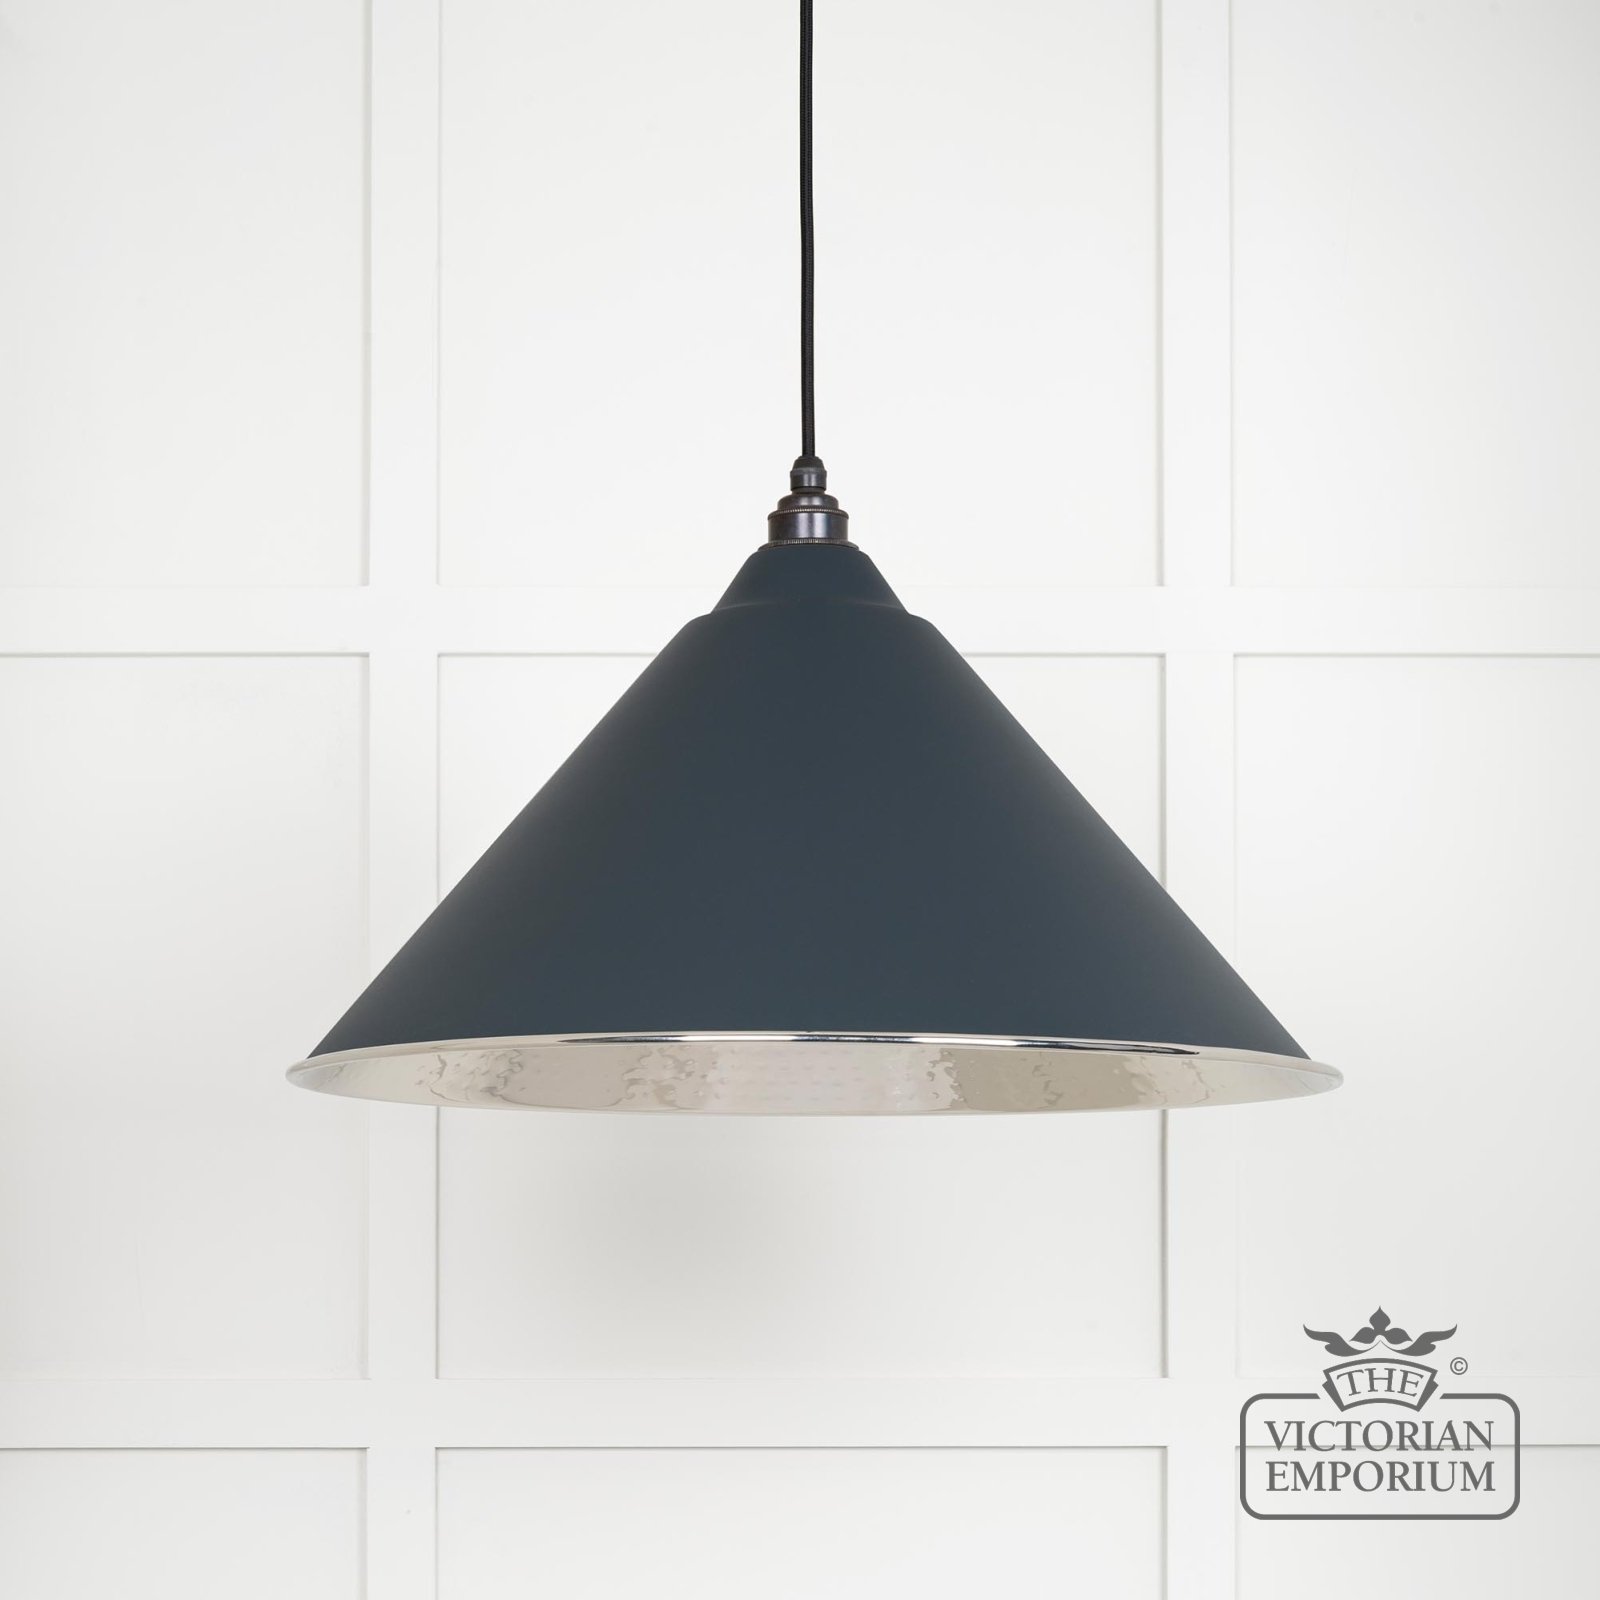 Hockliffe pendant light in hammered nickel and soot exterior